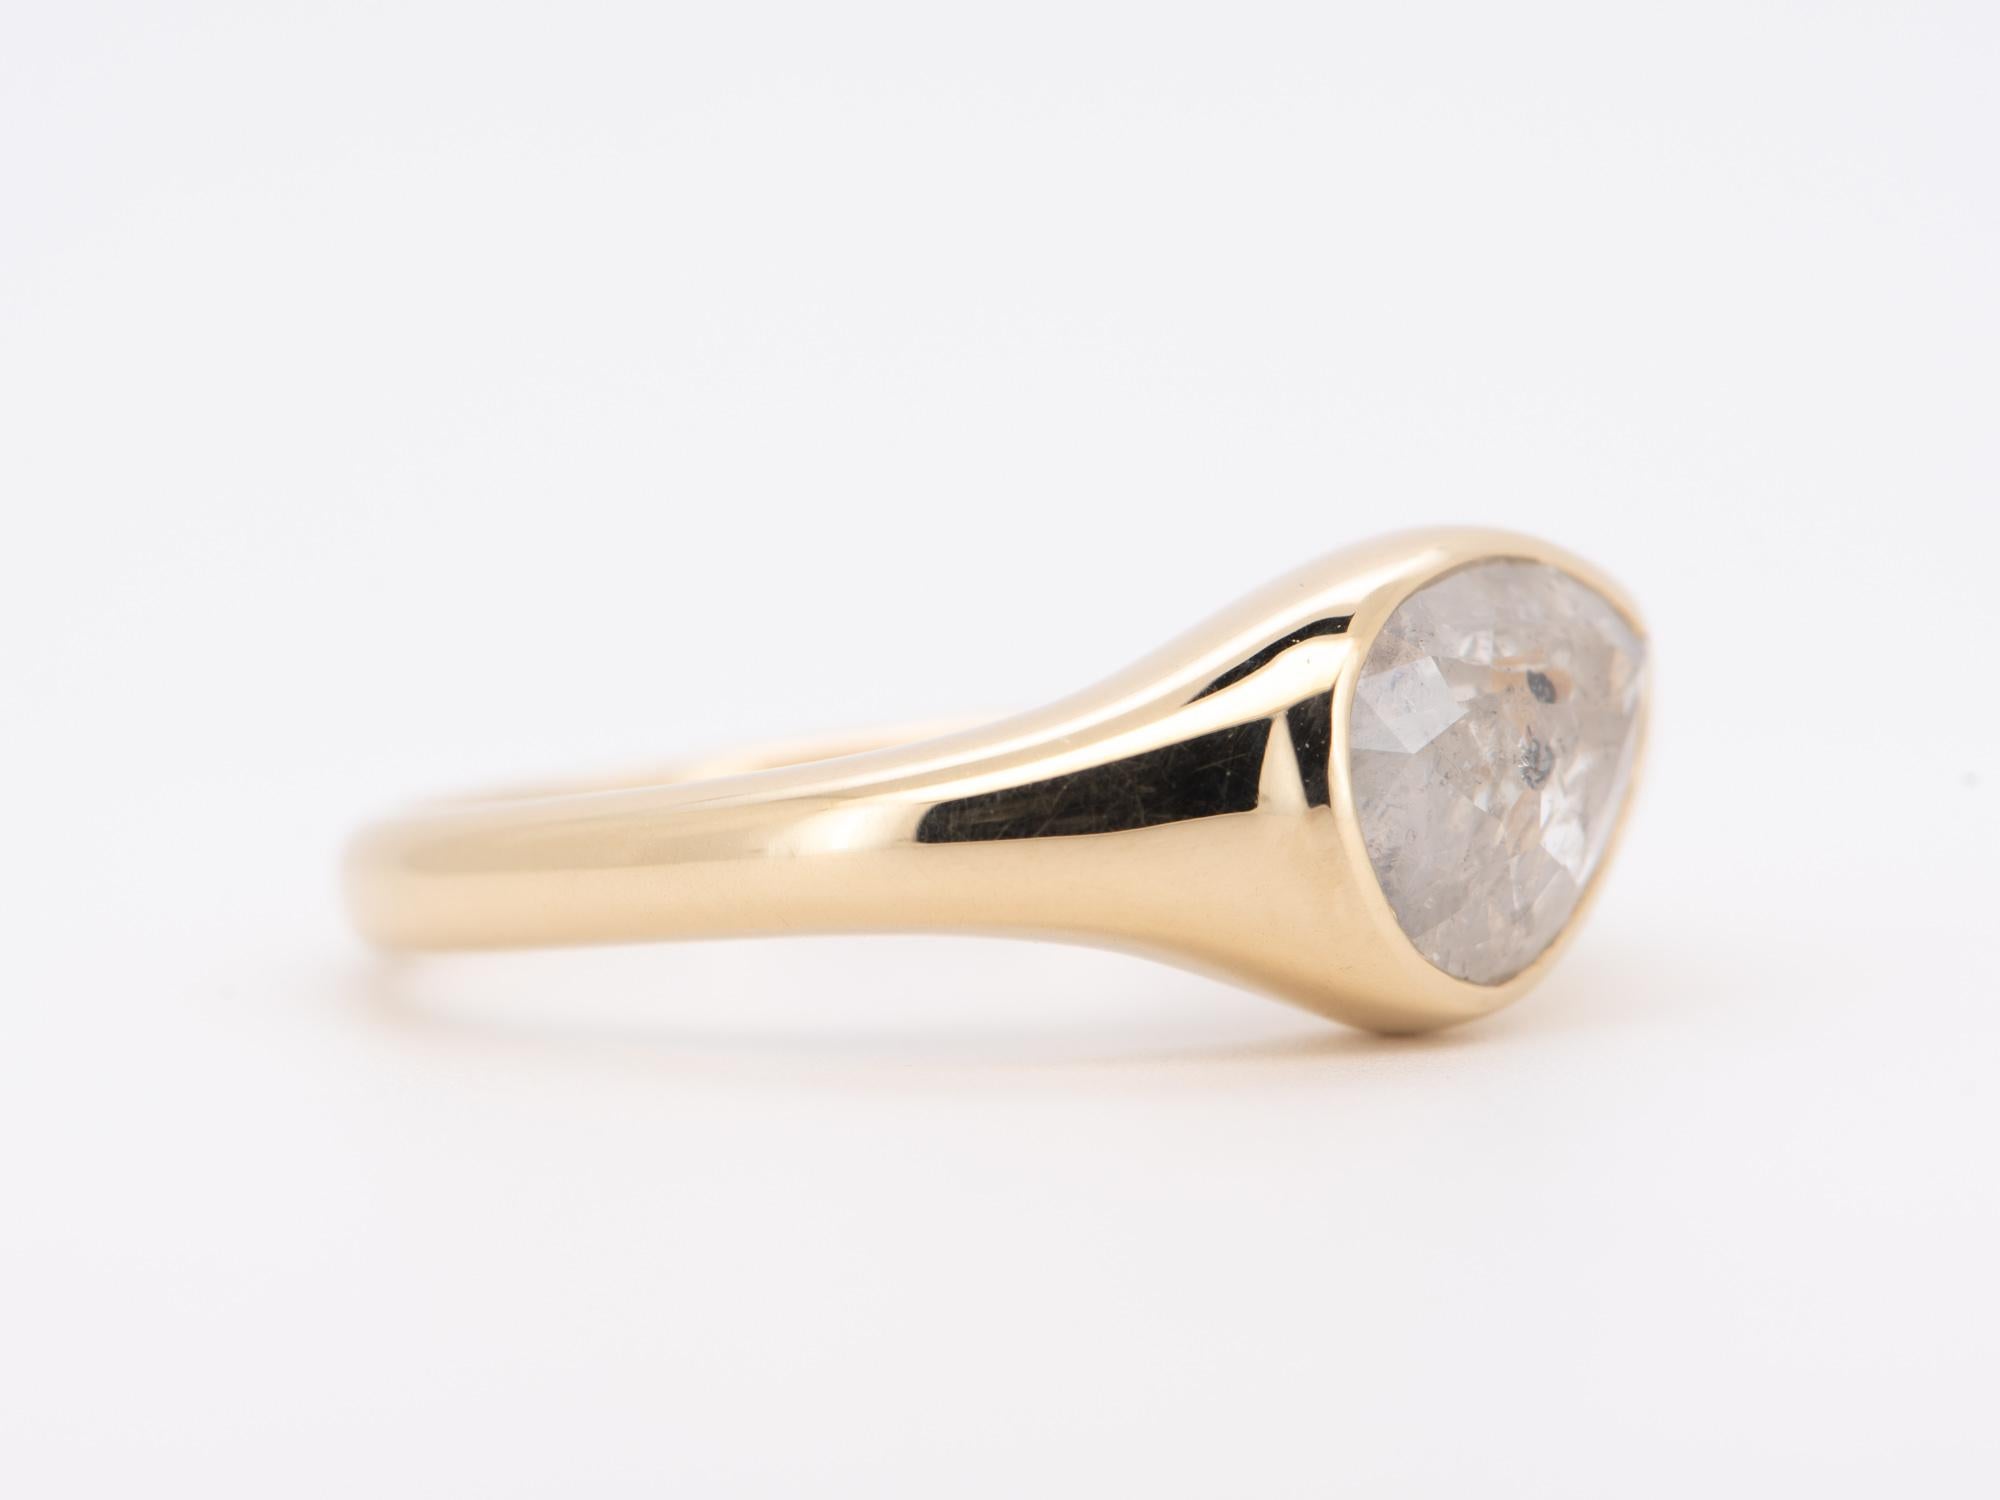 ♥ A very light and transparent rose cut diamond is bezel set in a unique way, atop a polished half round band
♥ Super comfortable to wear as there are no prongs and the entire ring is designed in a flowy shape. Unique and sparkly diamond!
♥ The